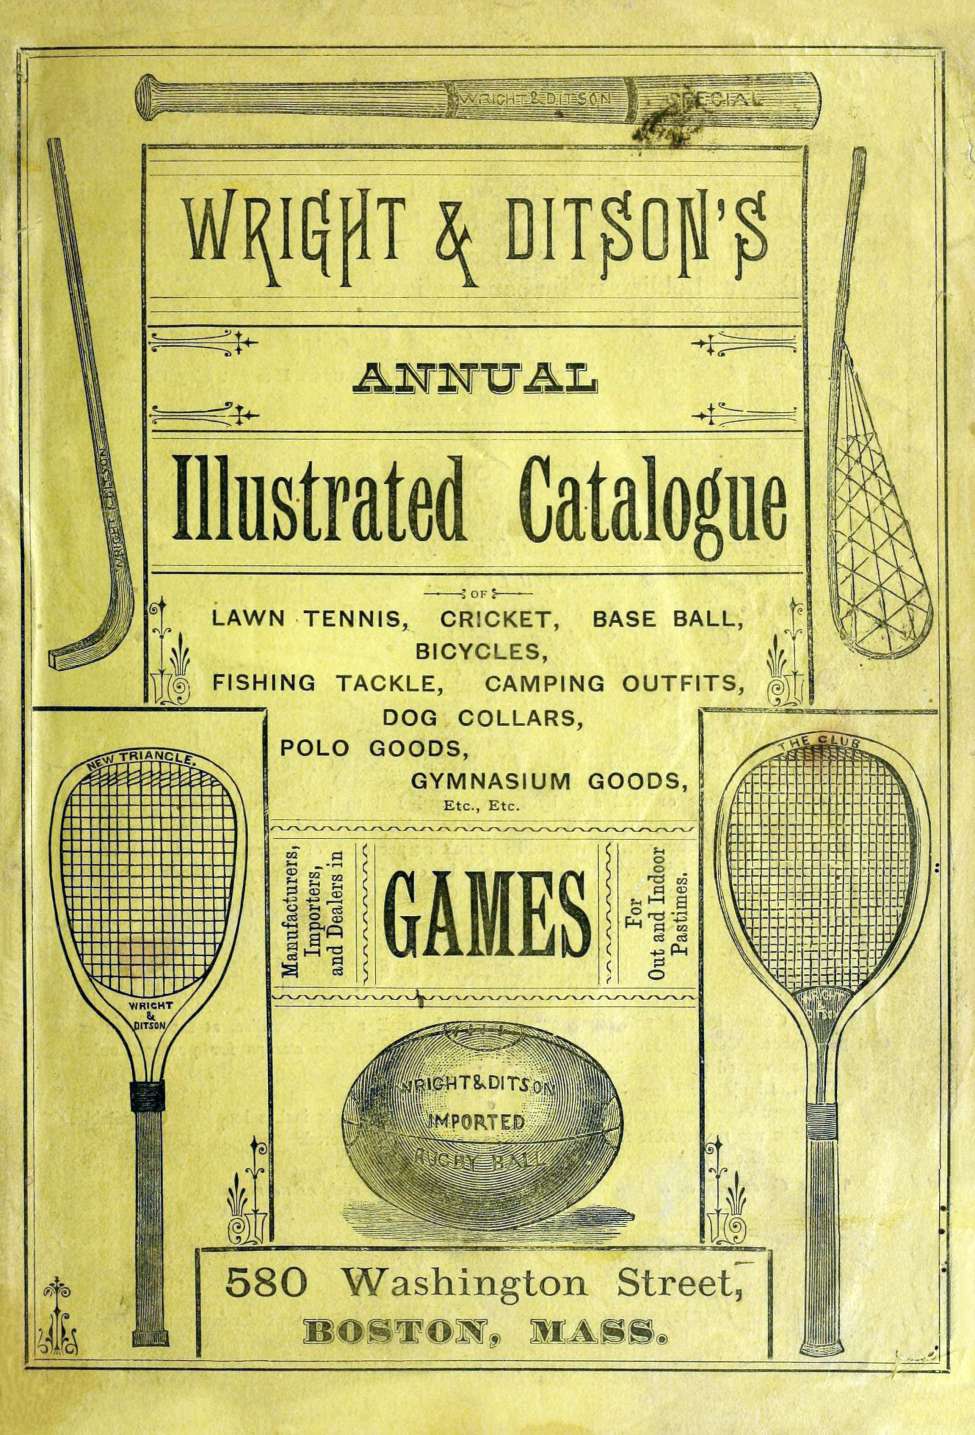 Comic Book Cover For Wright and Ditsons Annual Illustrated Catalogue